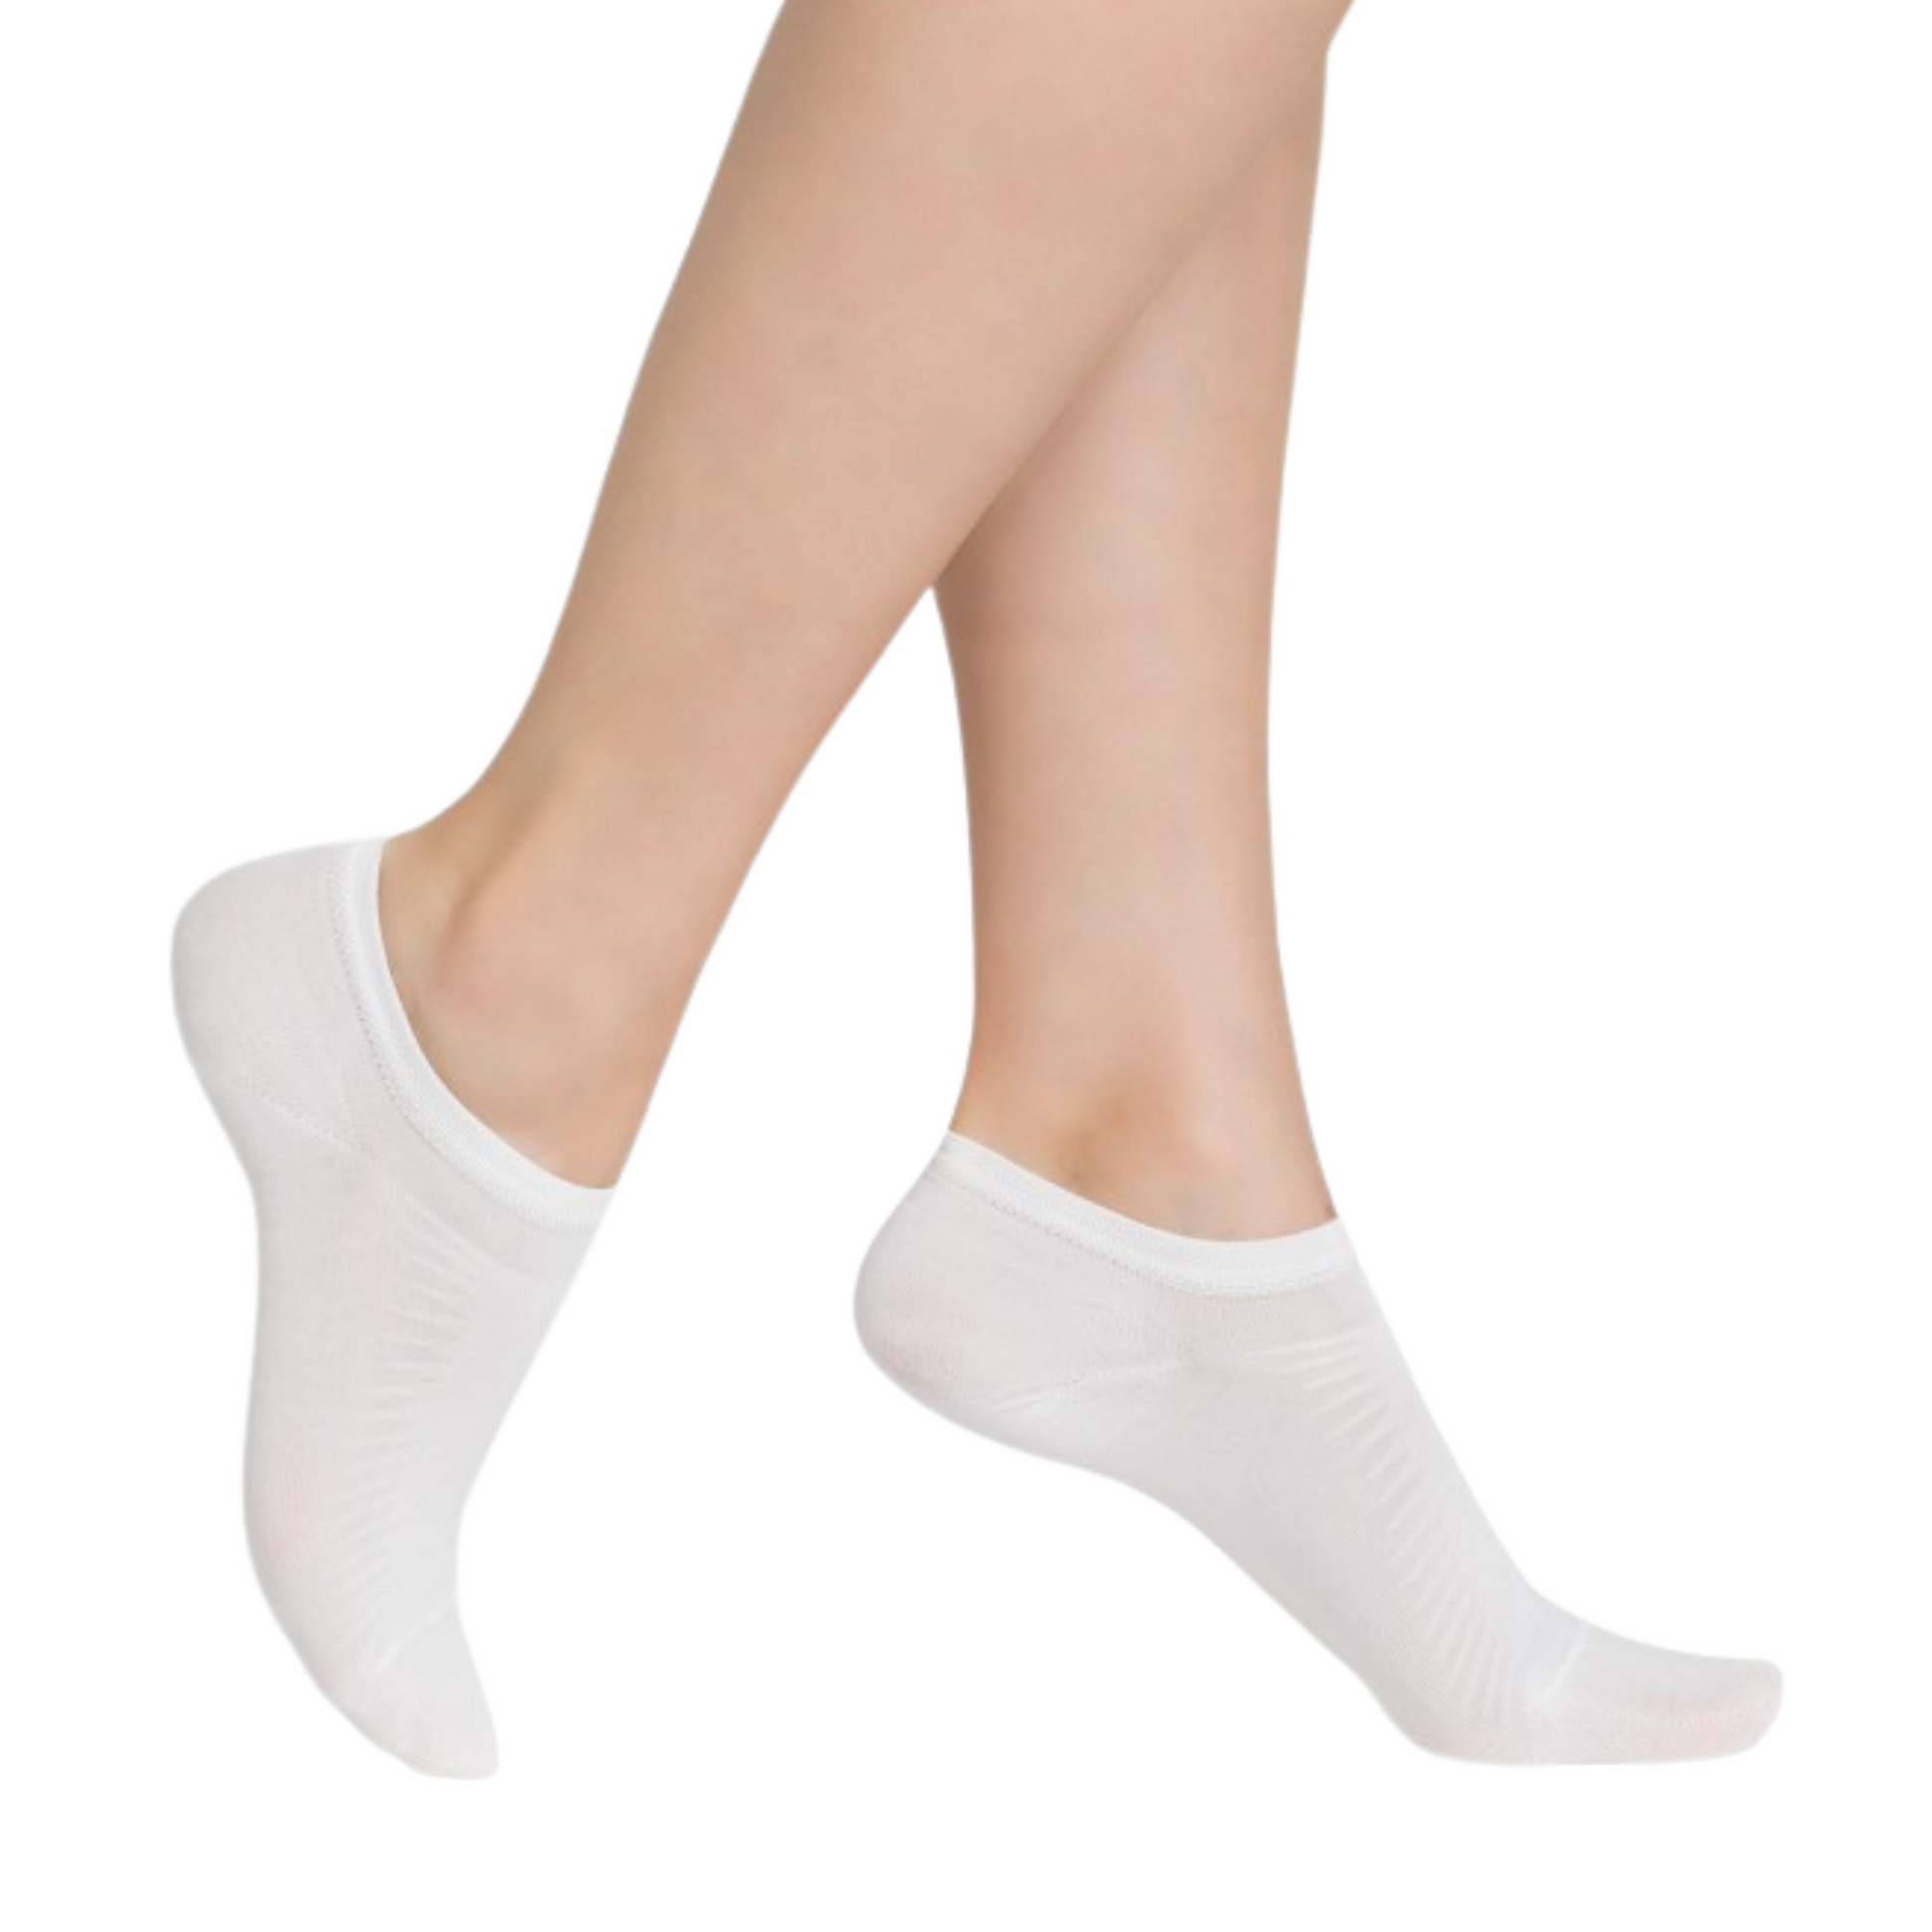 A pair of low cut ankle height socks in white is pictured.